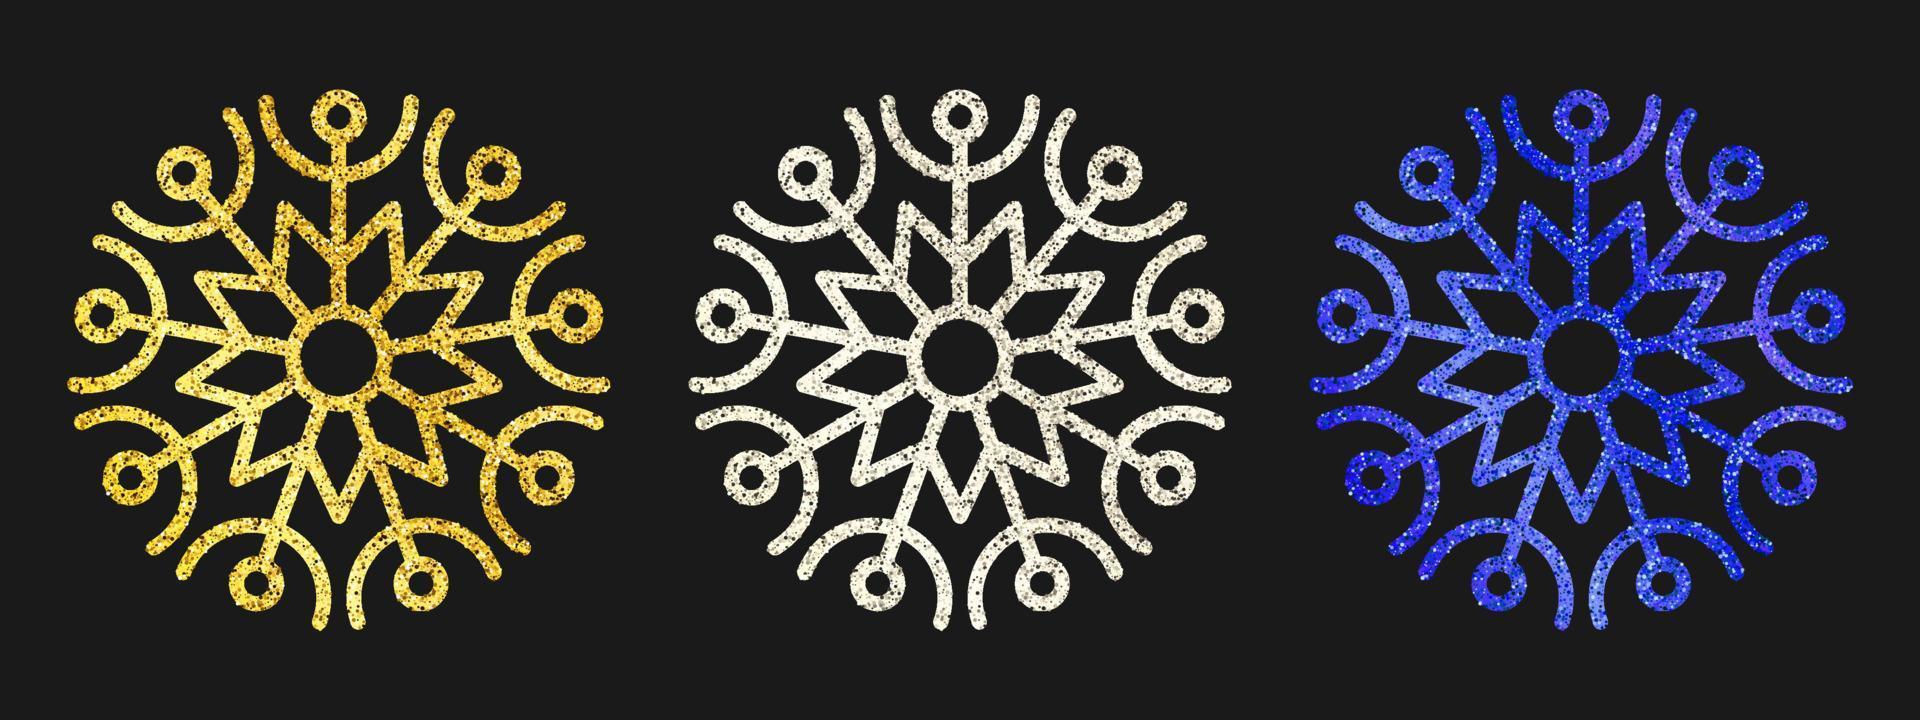 Glitter snowflakes on dark background. Set of three gold, silver and blue glitter snowflakes. Christmas and New Year decoration elements. Vector illustration.